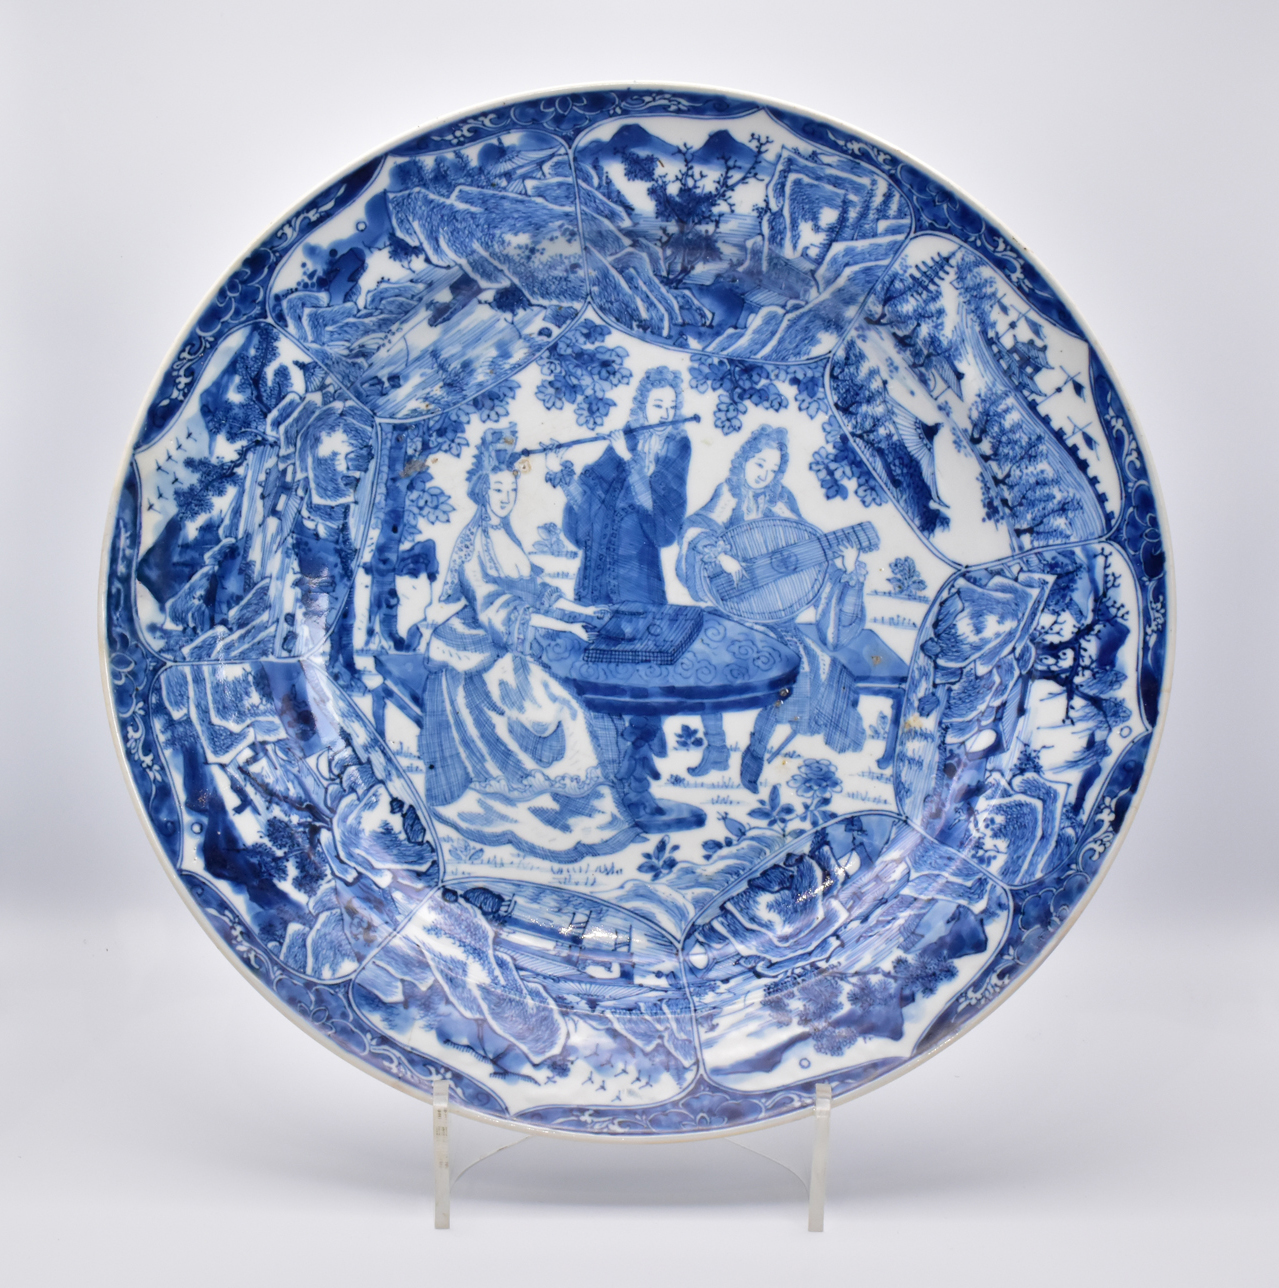 A CHINESE BLUE AND WHITE PORCELAIN ‘MUSICIANS' DISH, QING DYNASTY, KANGXI PERIOD, 1662 – 1722